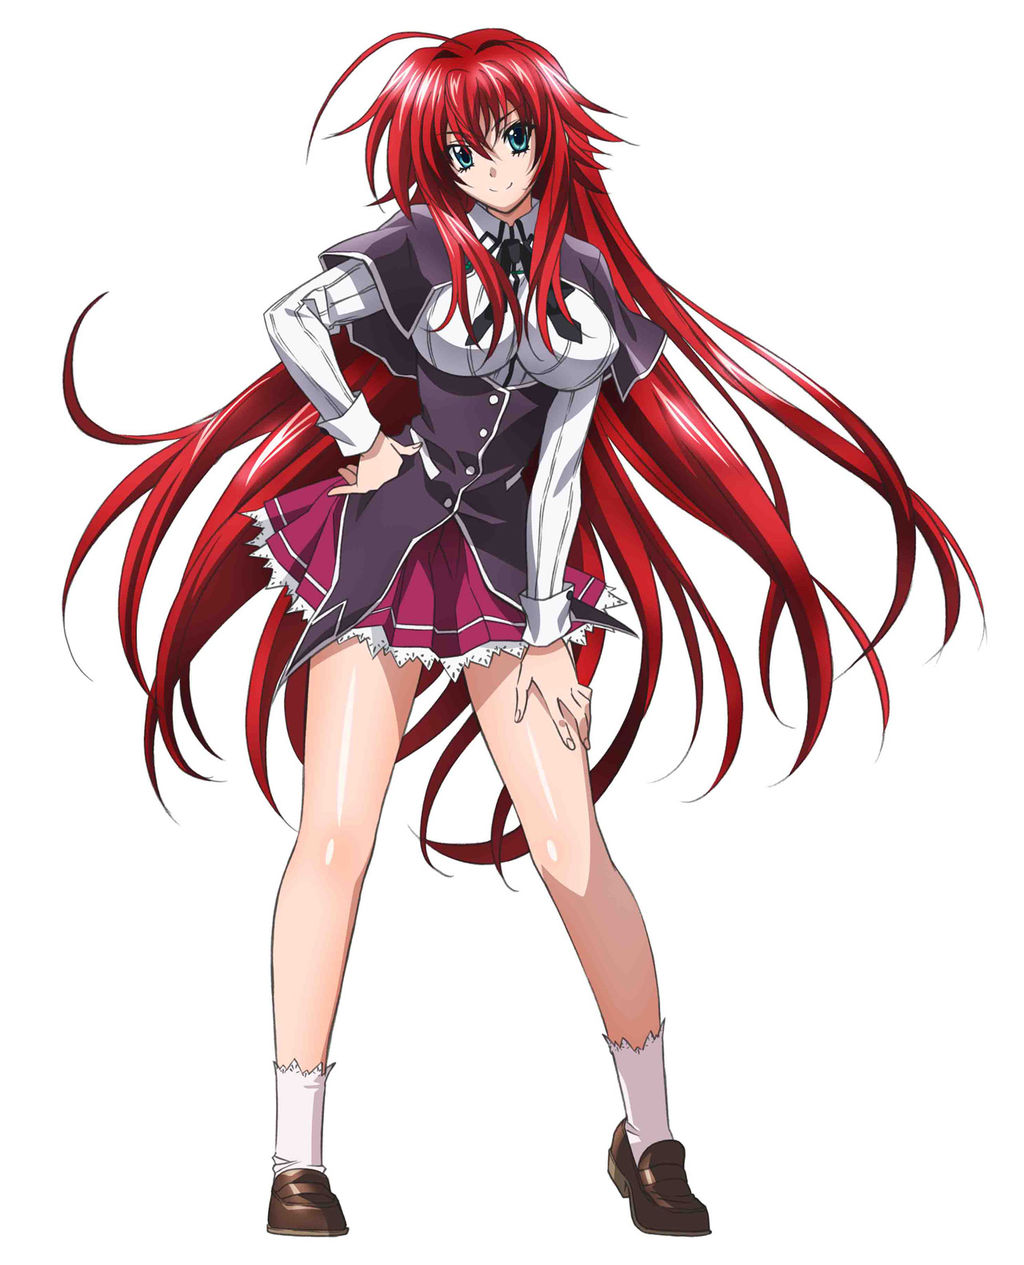 highschool dxd characters